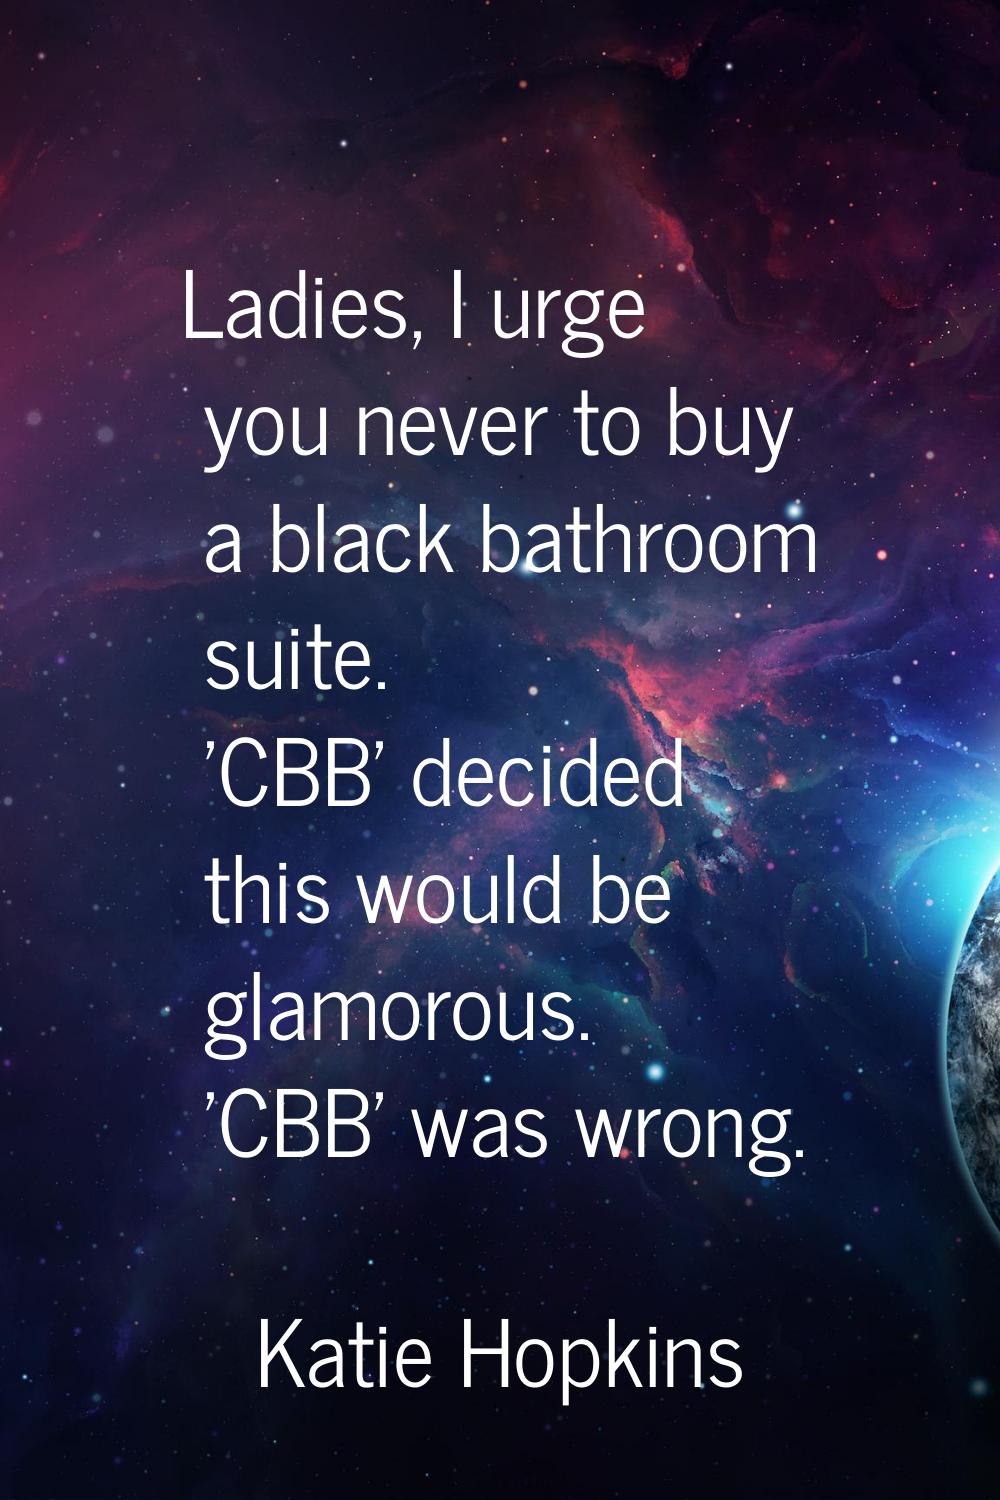 Ladies, I urge you never to buy a black bathroom suite. 'CBB' decided this would be glamorous. 'CBB